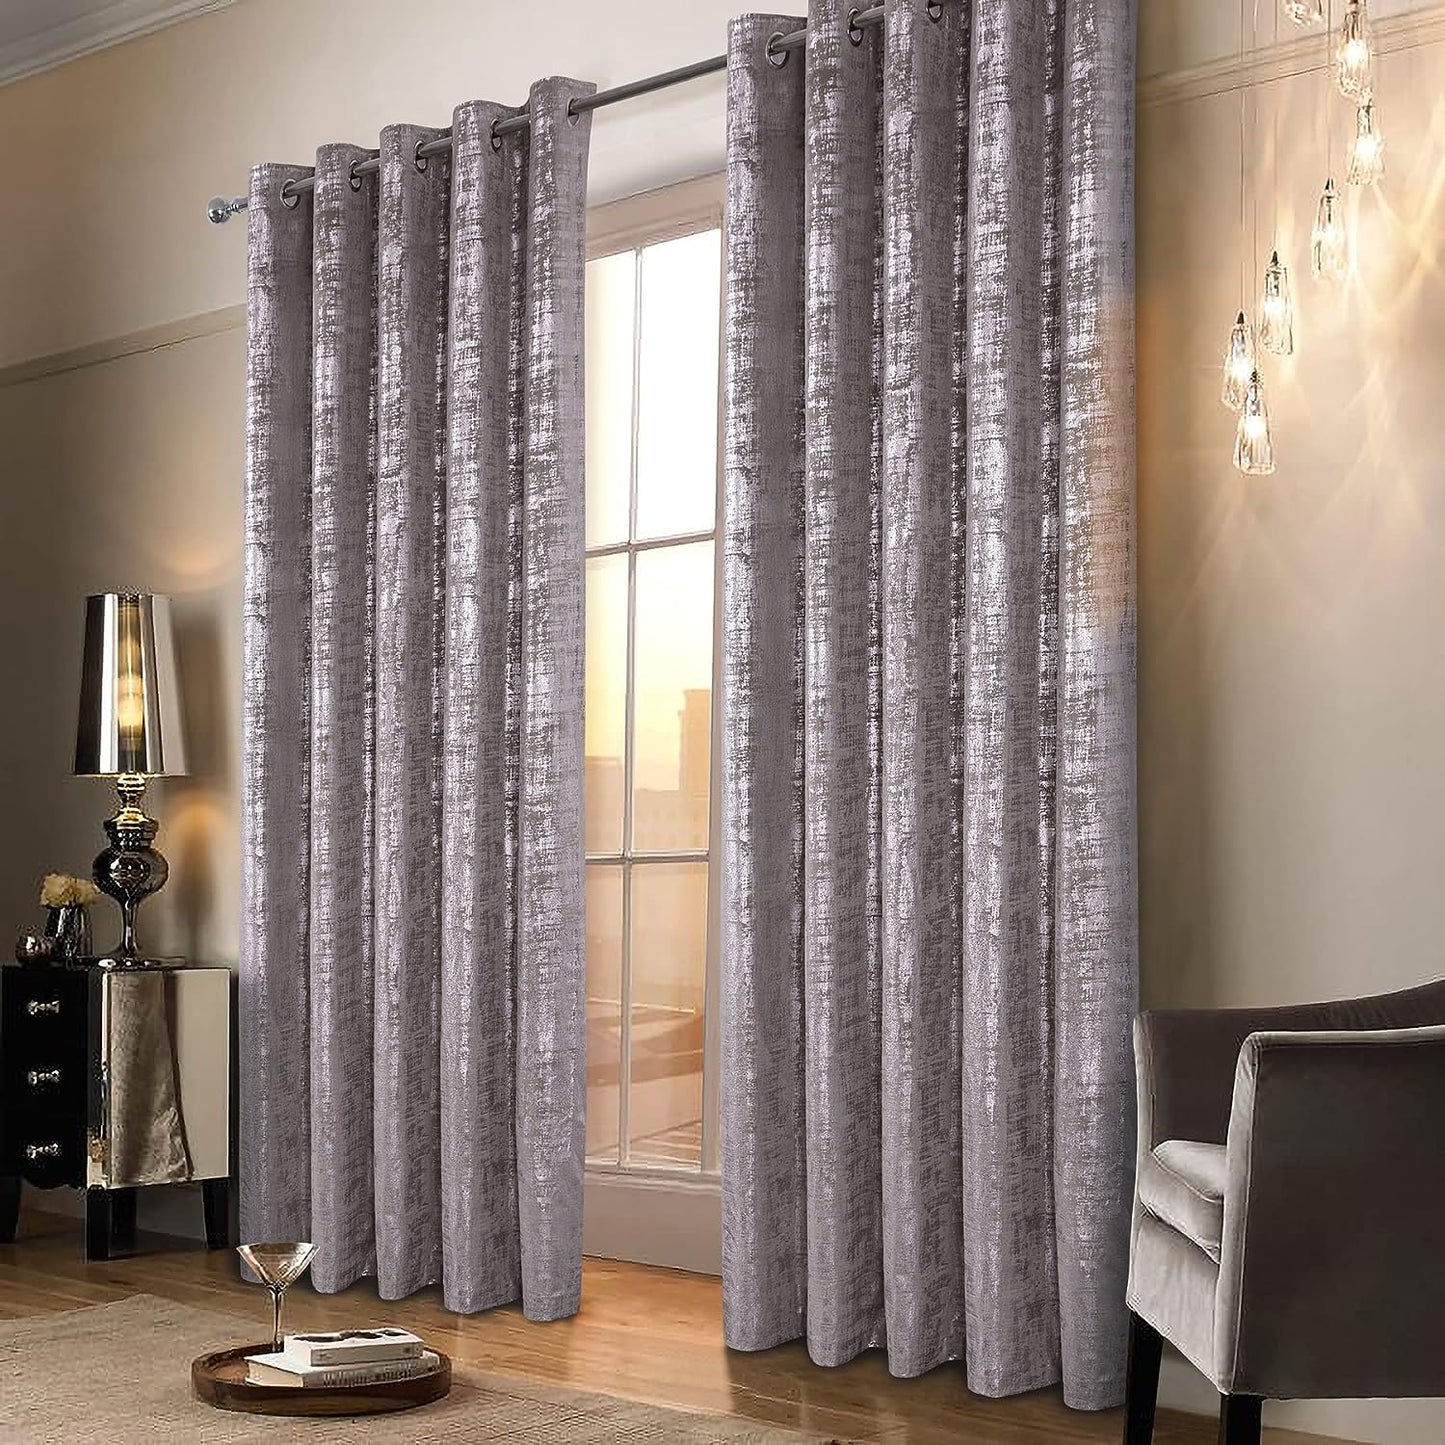 Always4U Soft Velvet Curtains 95 Inch Length Luxury Bedroom Curtains Gold Foil Print Window Curtains for Living Room 1 Panel White  always4u Champagne (Silver Print) 2 Panels: 52''W*95''L 